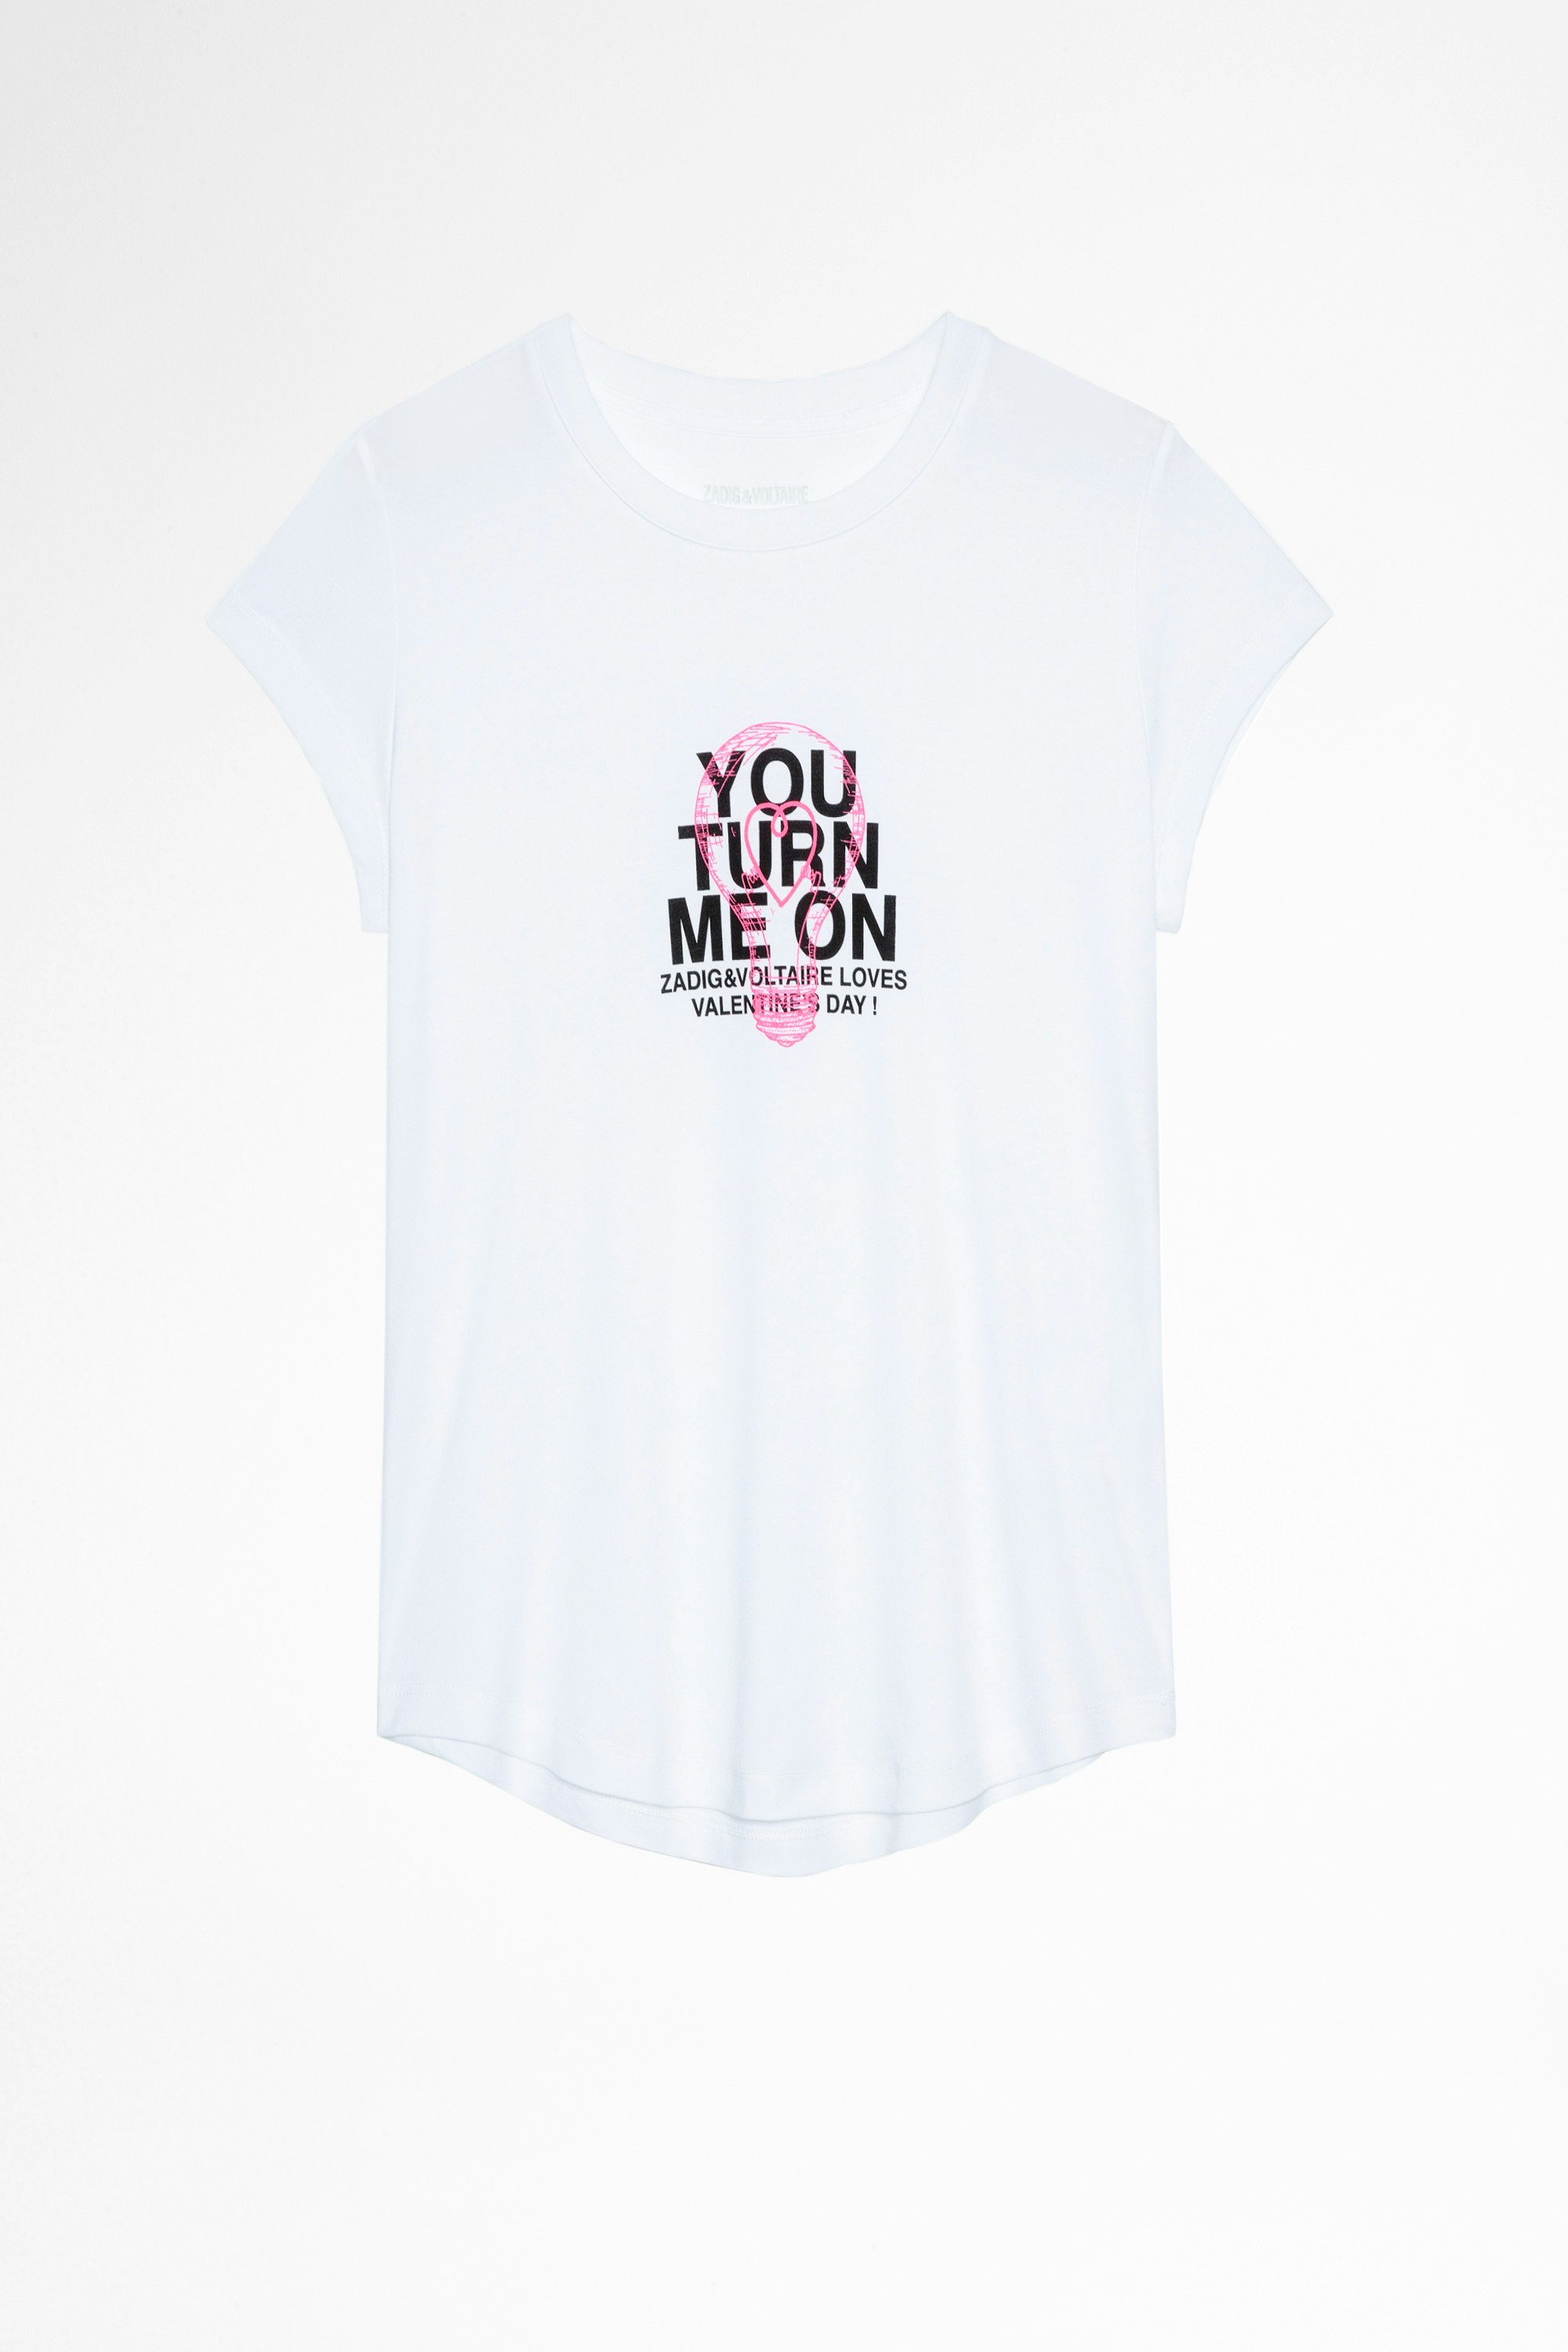 Woop you turn me on T-shirt Women's white cotton T-shirt with You turn me on slogan. Made with fibers from organic farming.